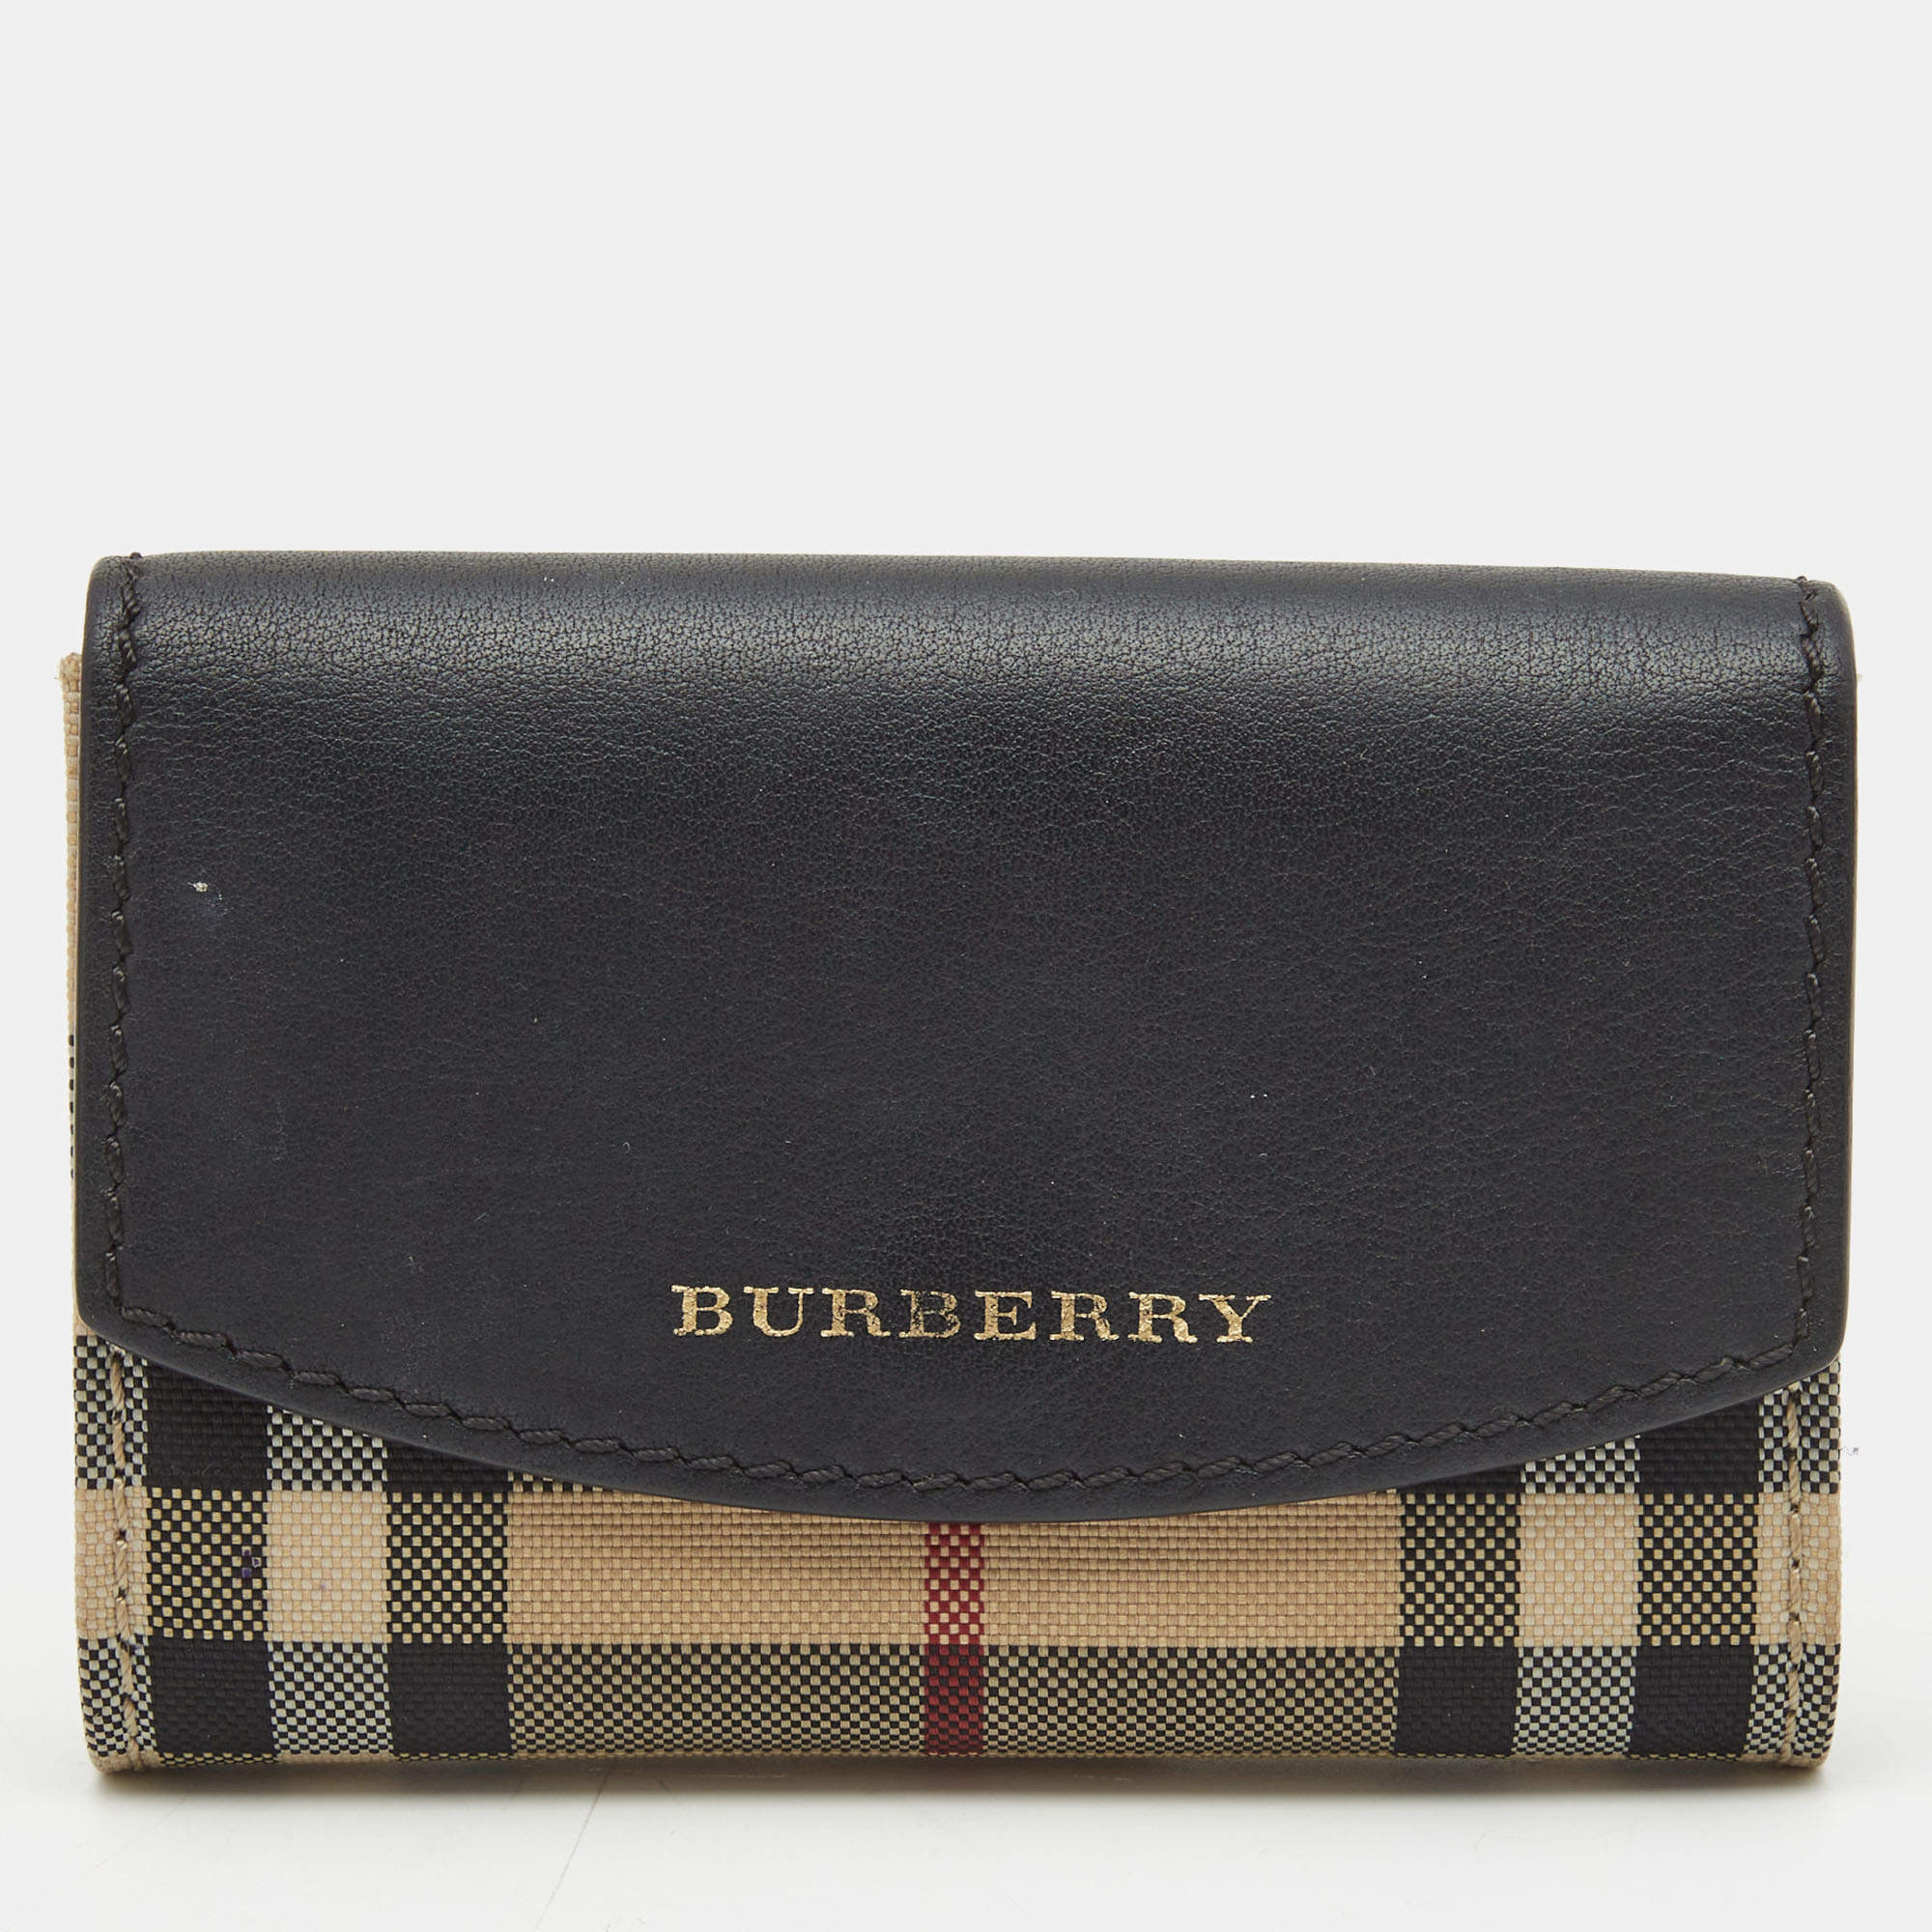 Burberry Black/Beige Housecheck Nylon and Leather Flap Compact Wallet